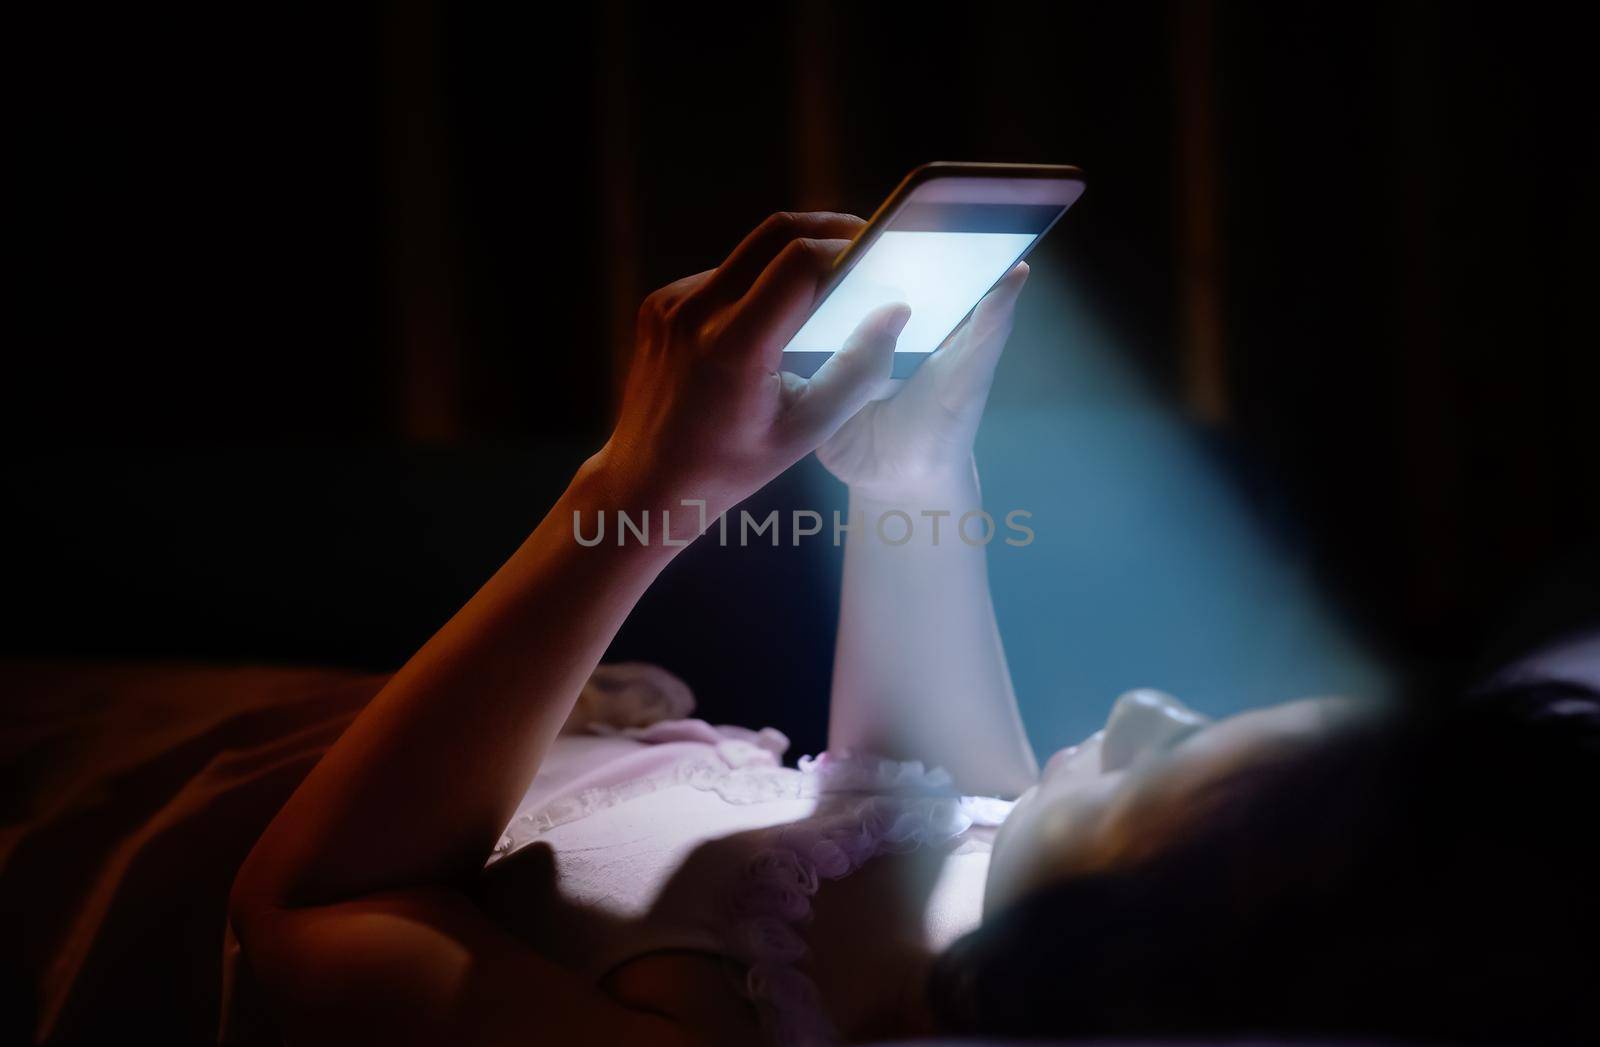 Blue Light from Your Phone at Night Damaging Your Eyes